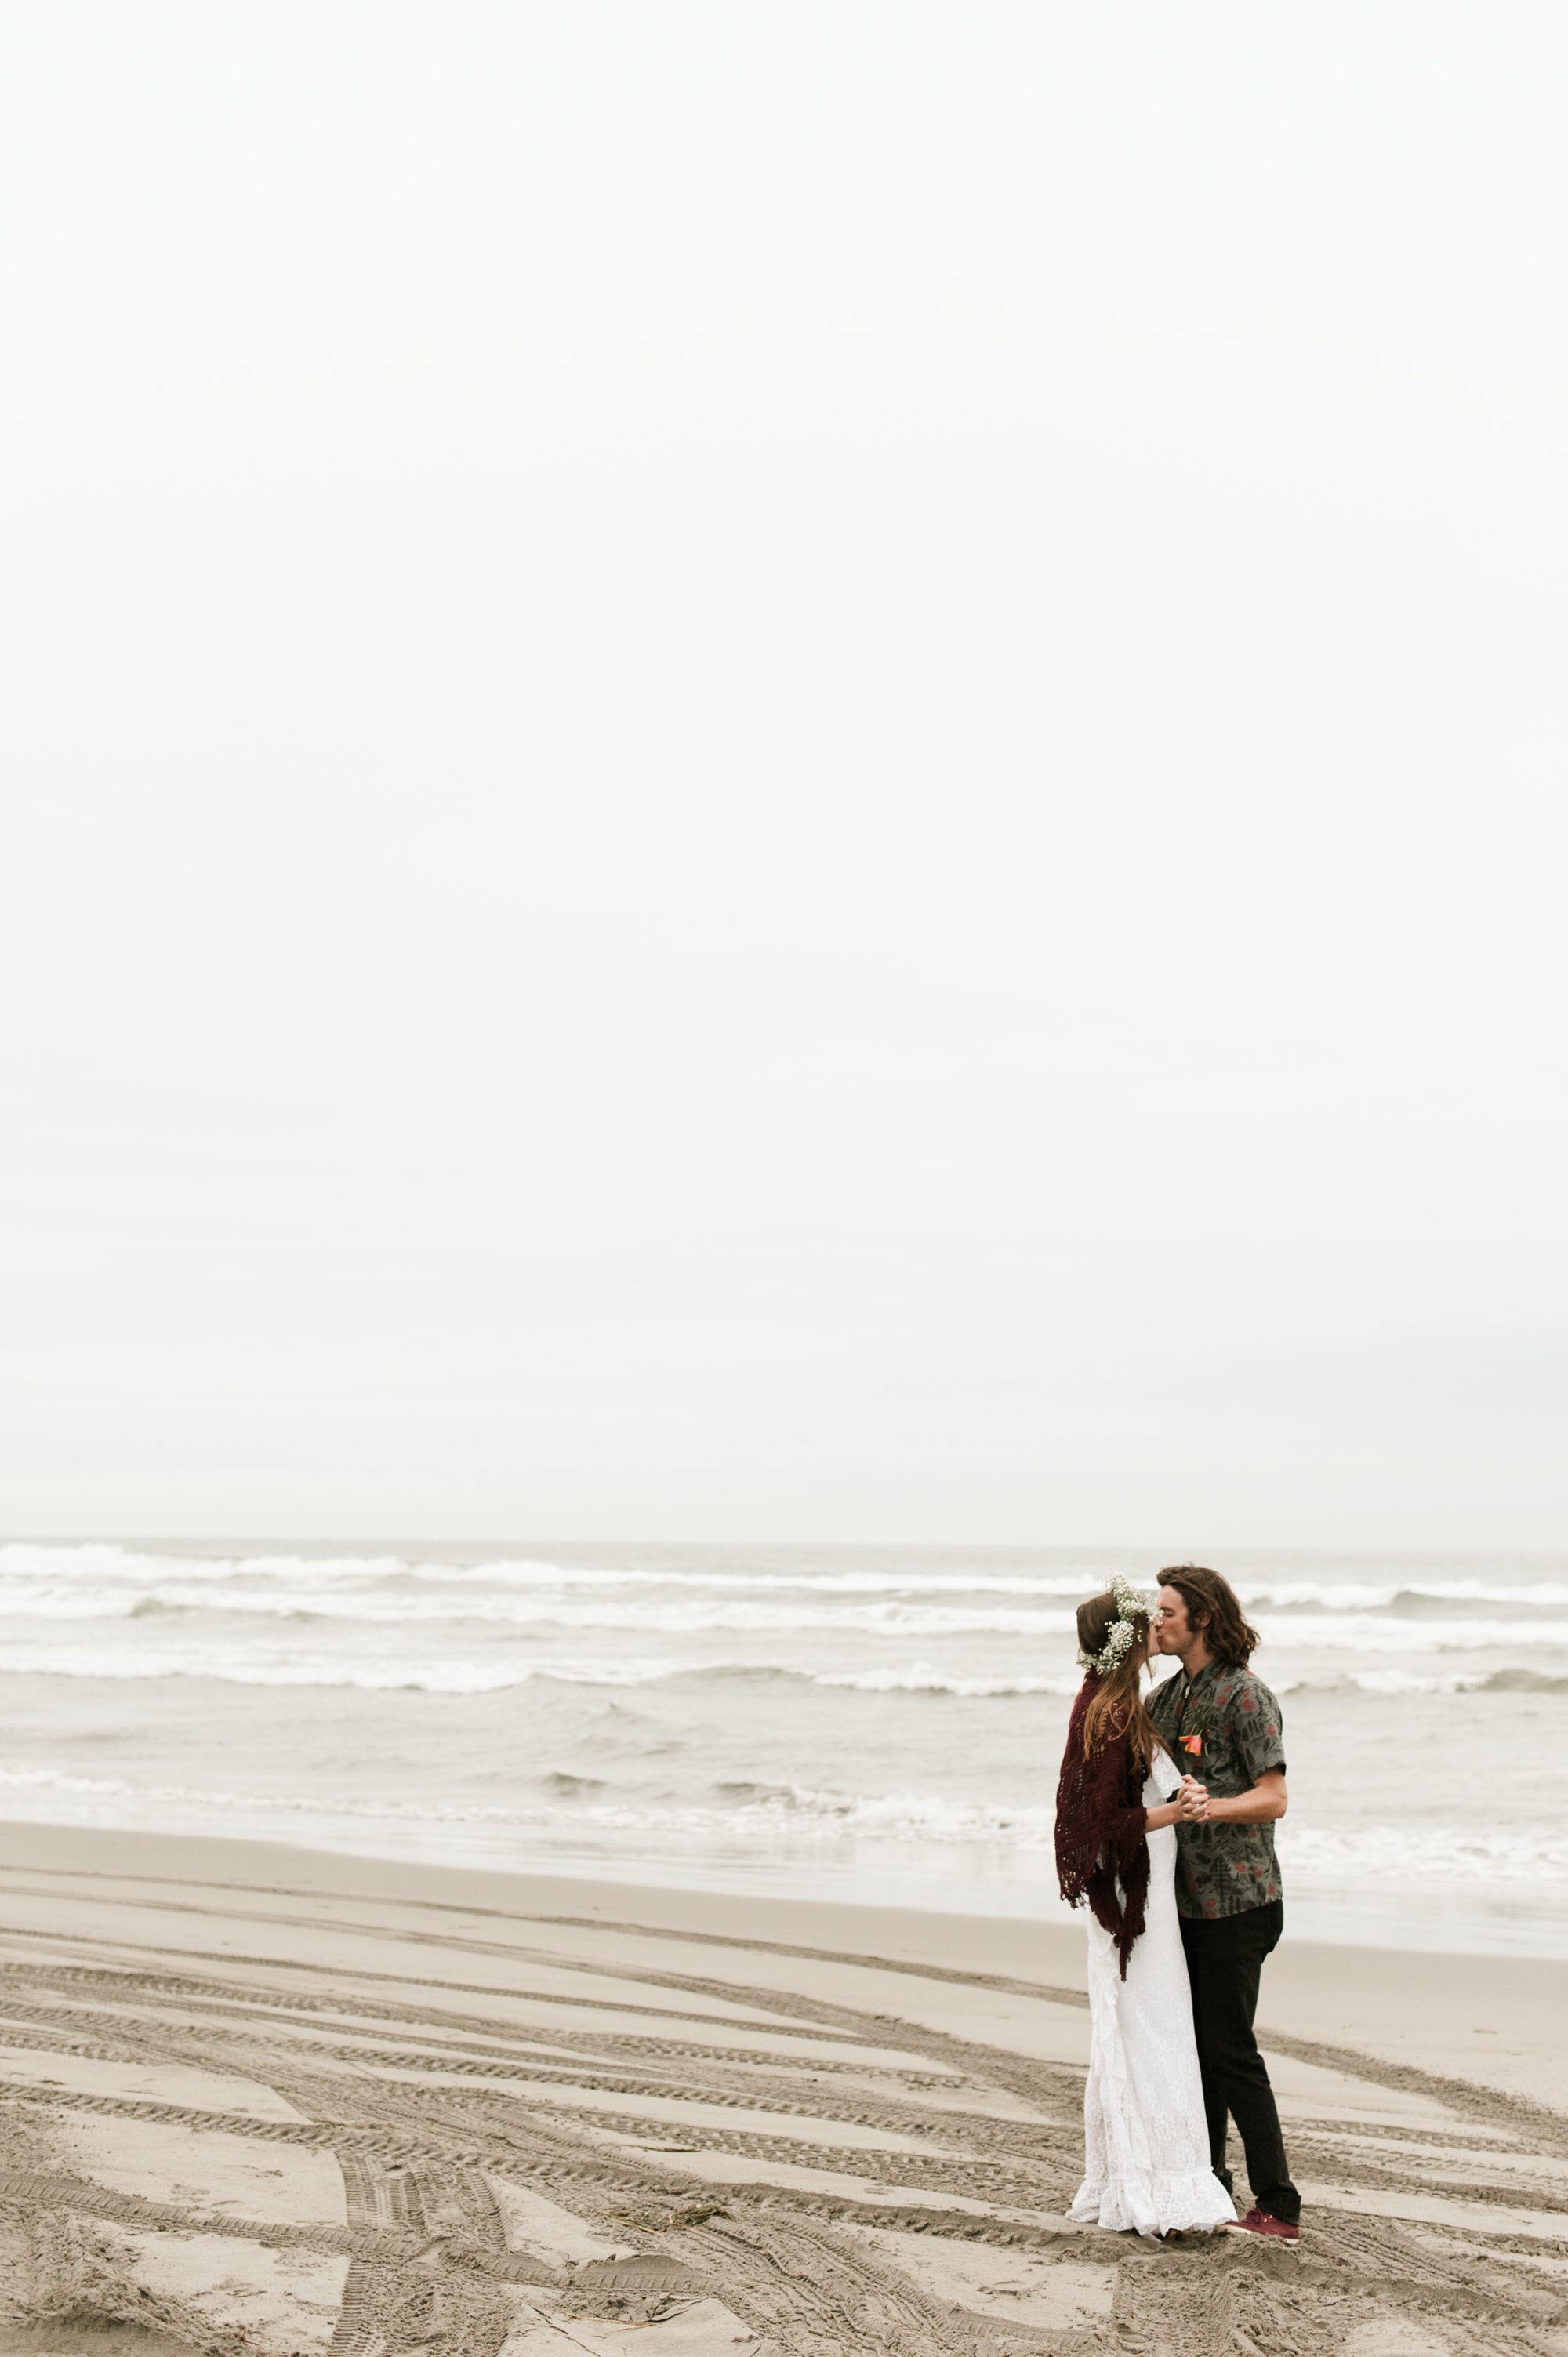 The newlyweds sneak a smooch on a deserted beach. By Sou'Wester wedding photographer Briana Morrison